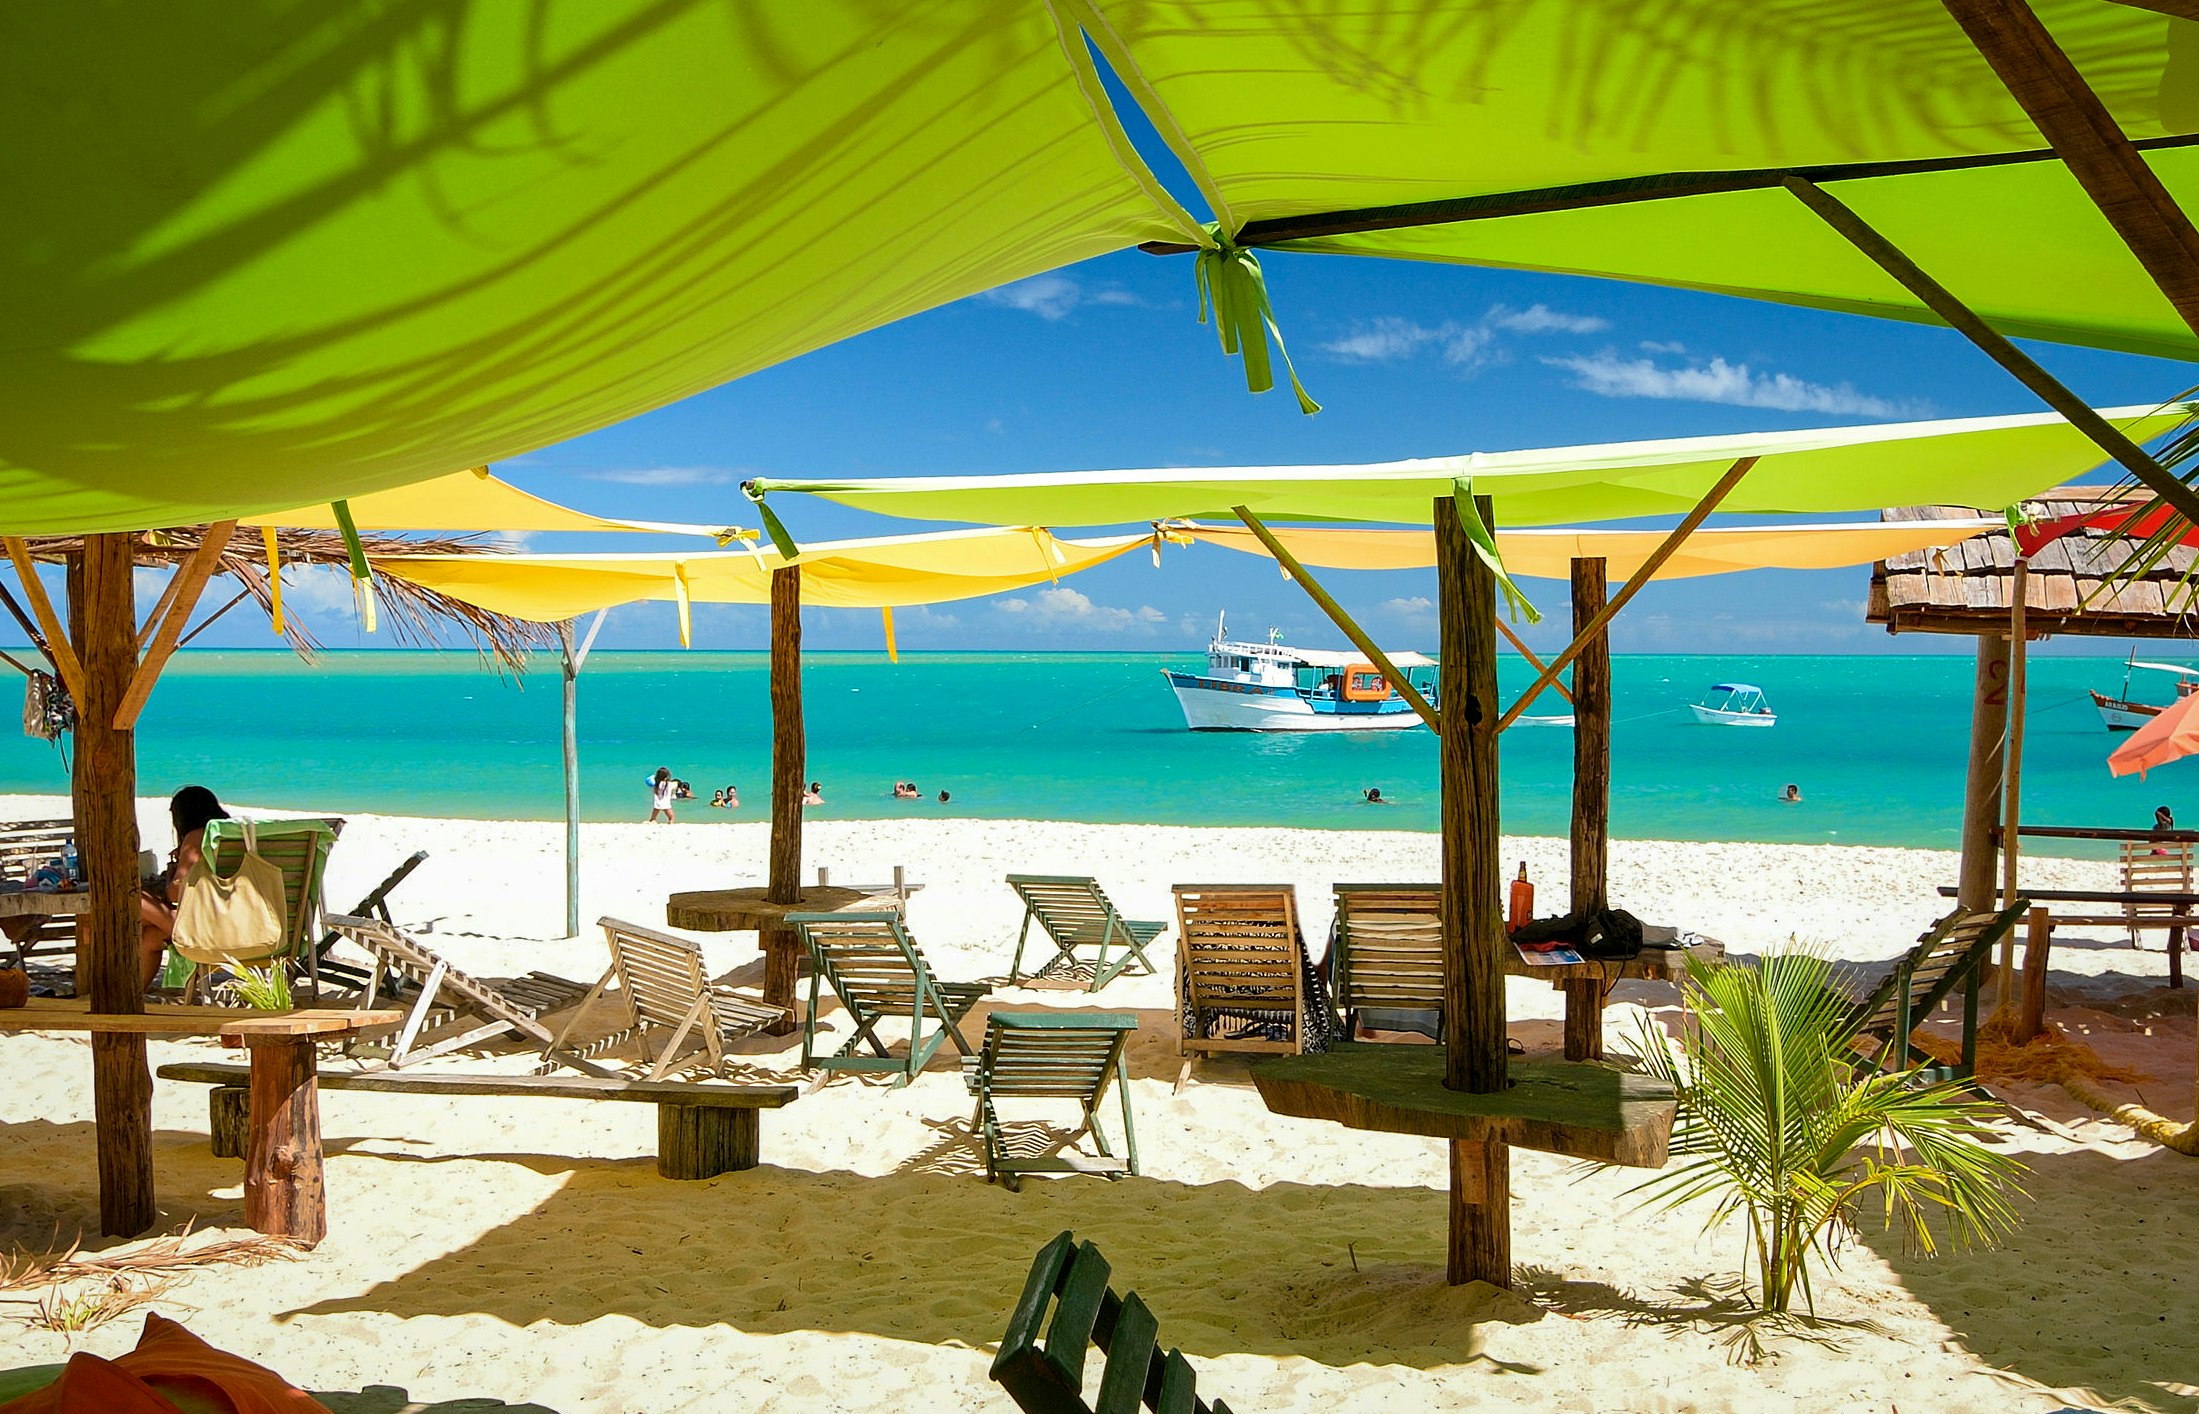 Wooden beach loungers sit on white sand underneath green and yellow awnings; bright blue water and a boat are visible in the background. Bahia, Brazil.